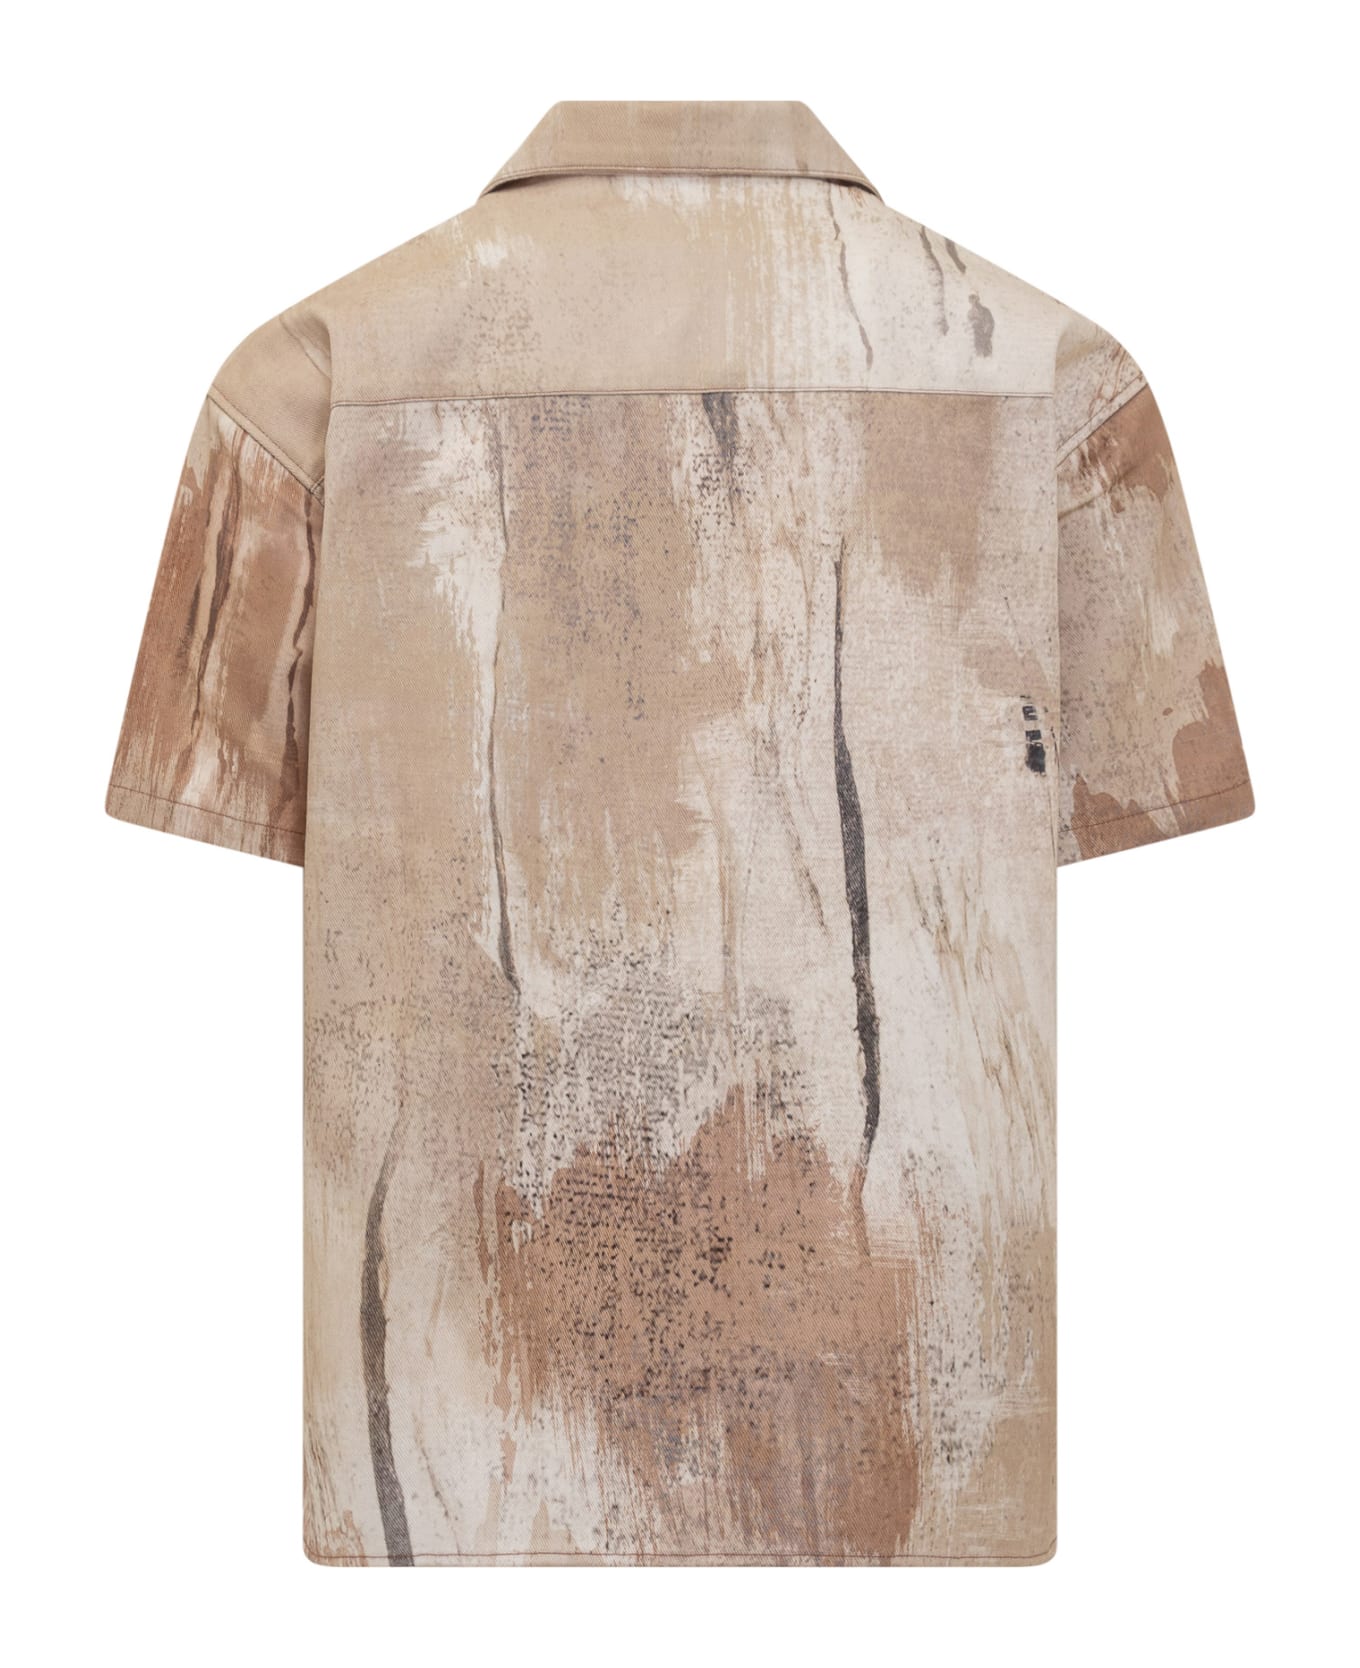 Andersson Bell Tie Dye Shirt - SAND シャツ